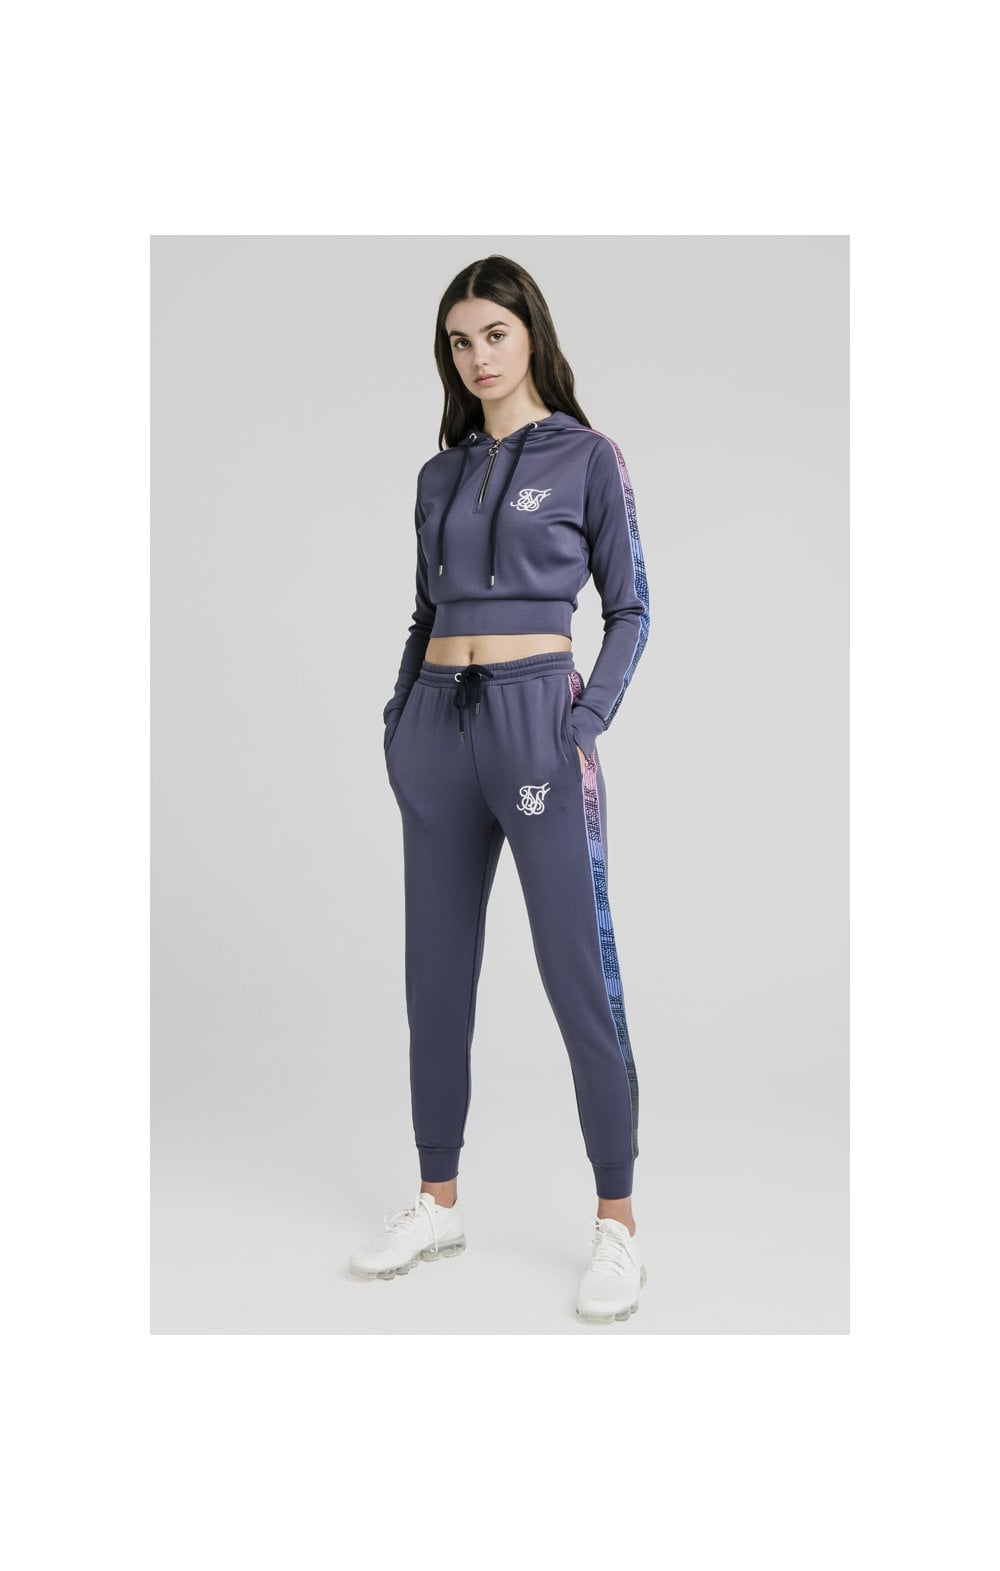 Load image into Gallery viewer, SikSilk Fade Runner Track Top - Night Shadow (4)